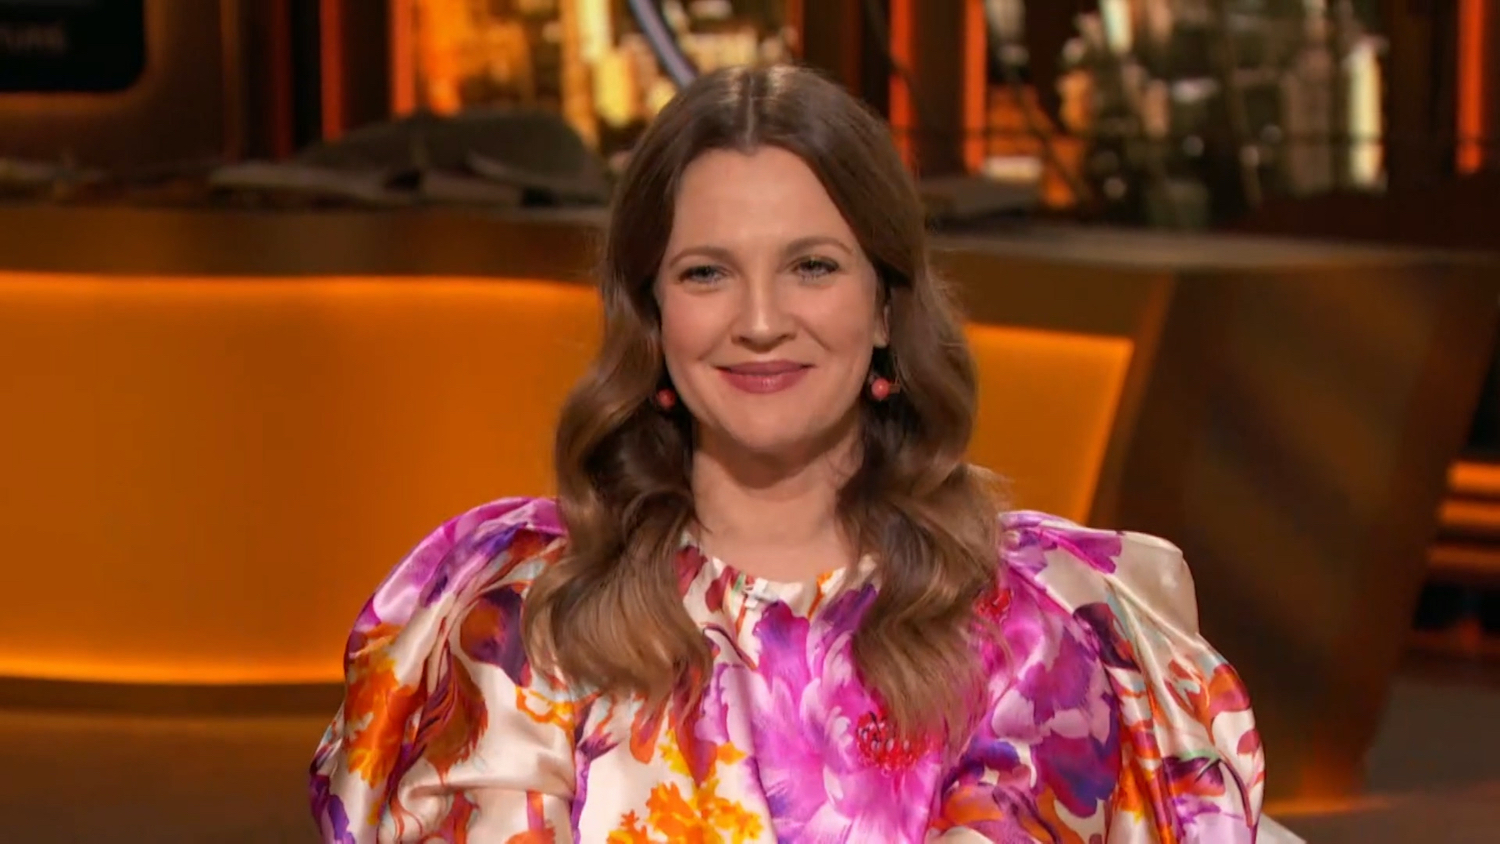 Drew Barrymore wears a brightly colored shirt on 'Watch What Happens Live'